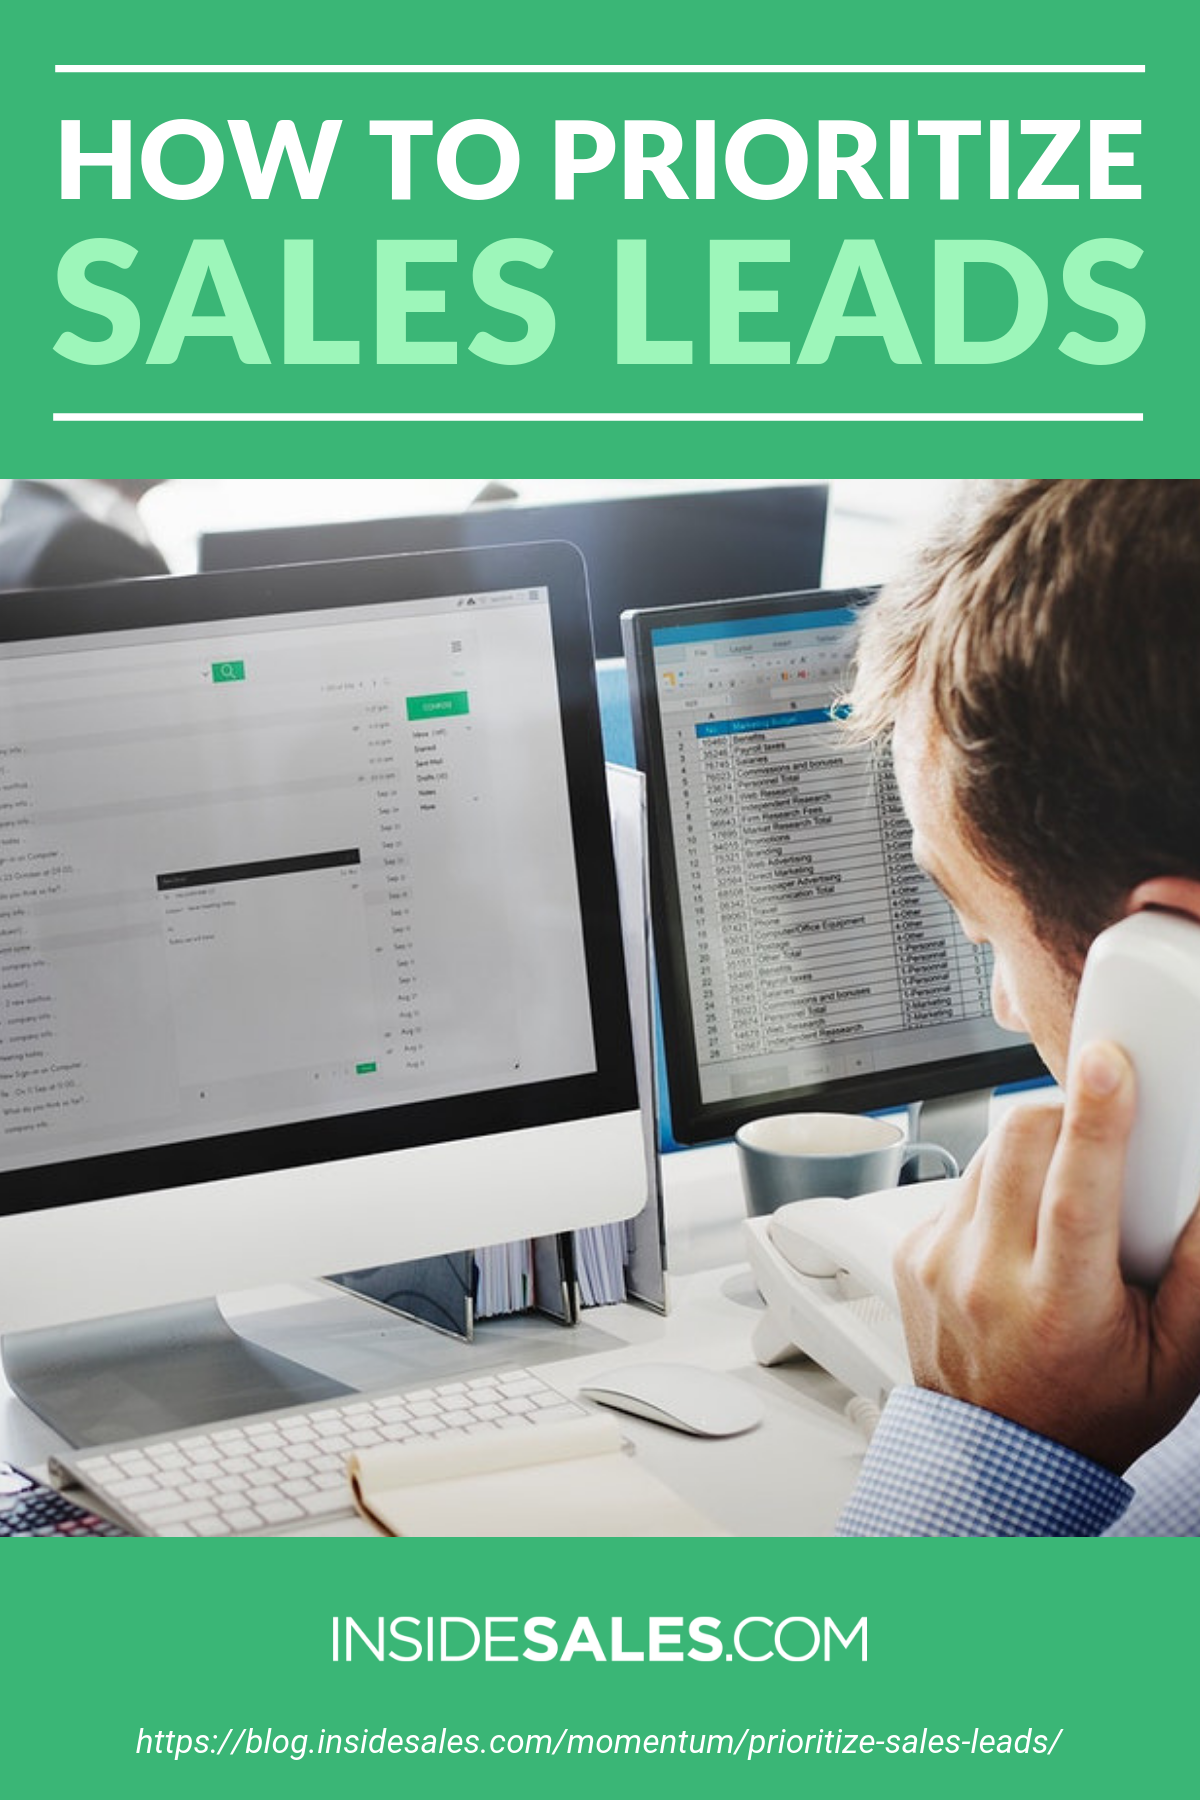 How to Prioritize Sales Leads https://www.insidesales.com/blog/momentum/prioritize-sales-leads/